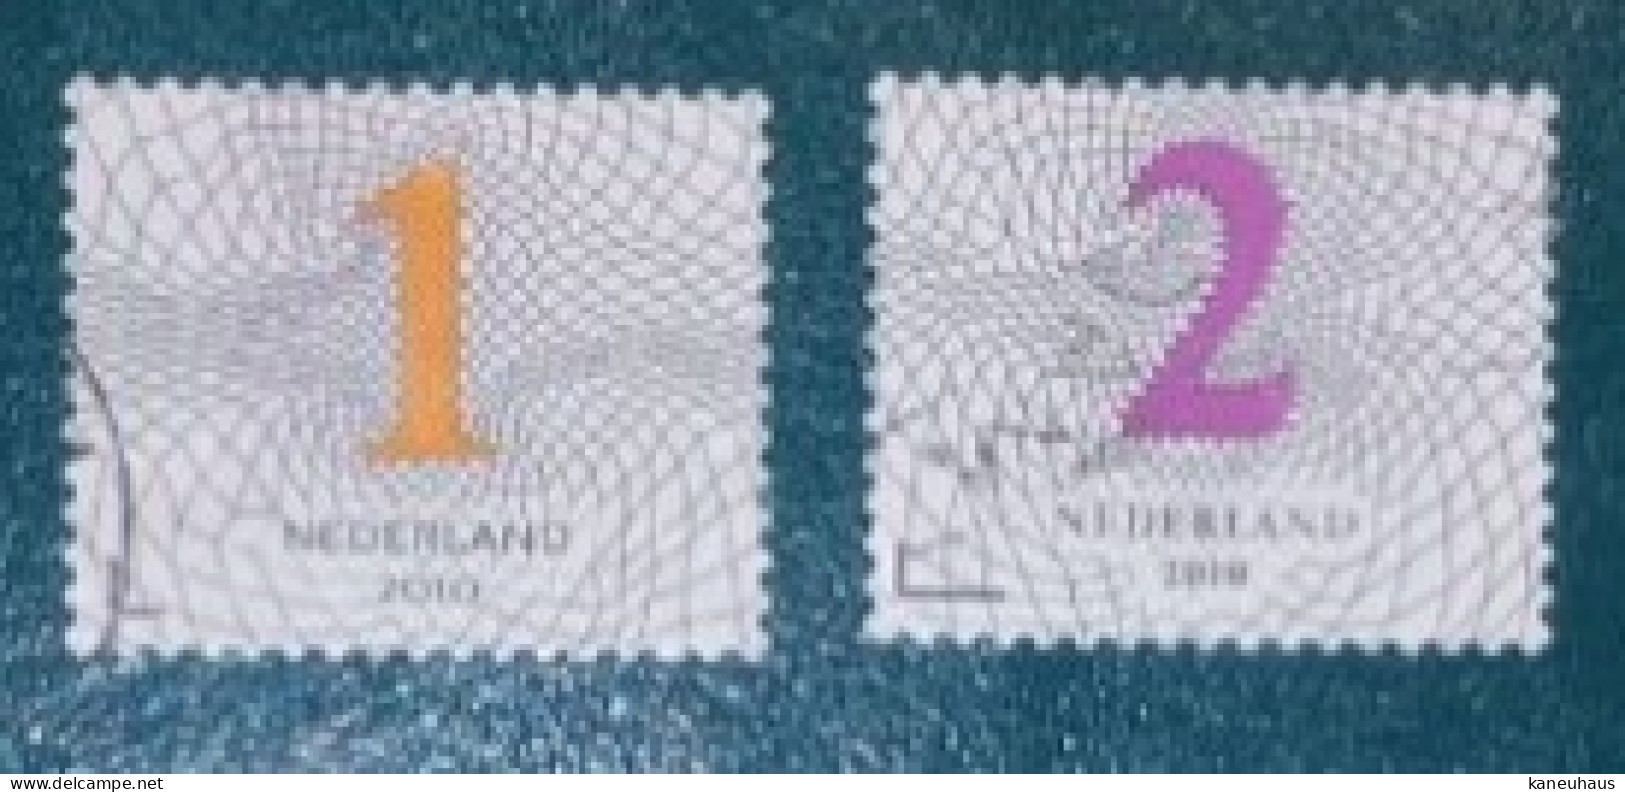 2010 Michel-Nr. 2771+2772A Gestempelt - Used Stamps